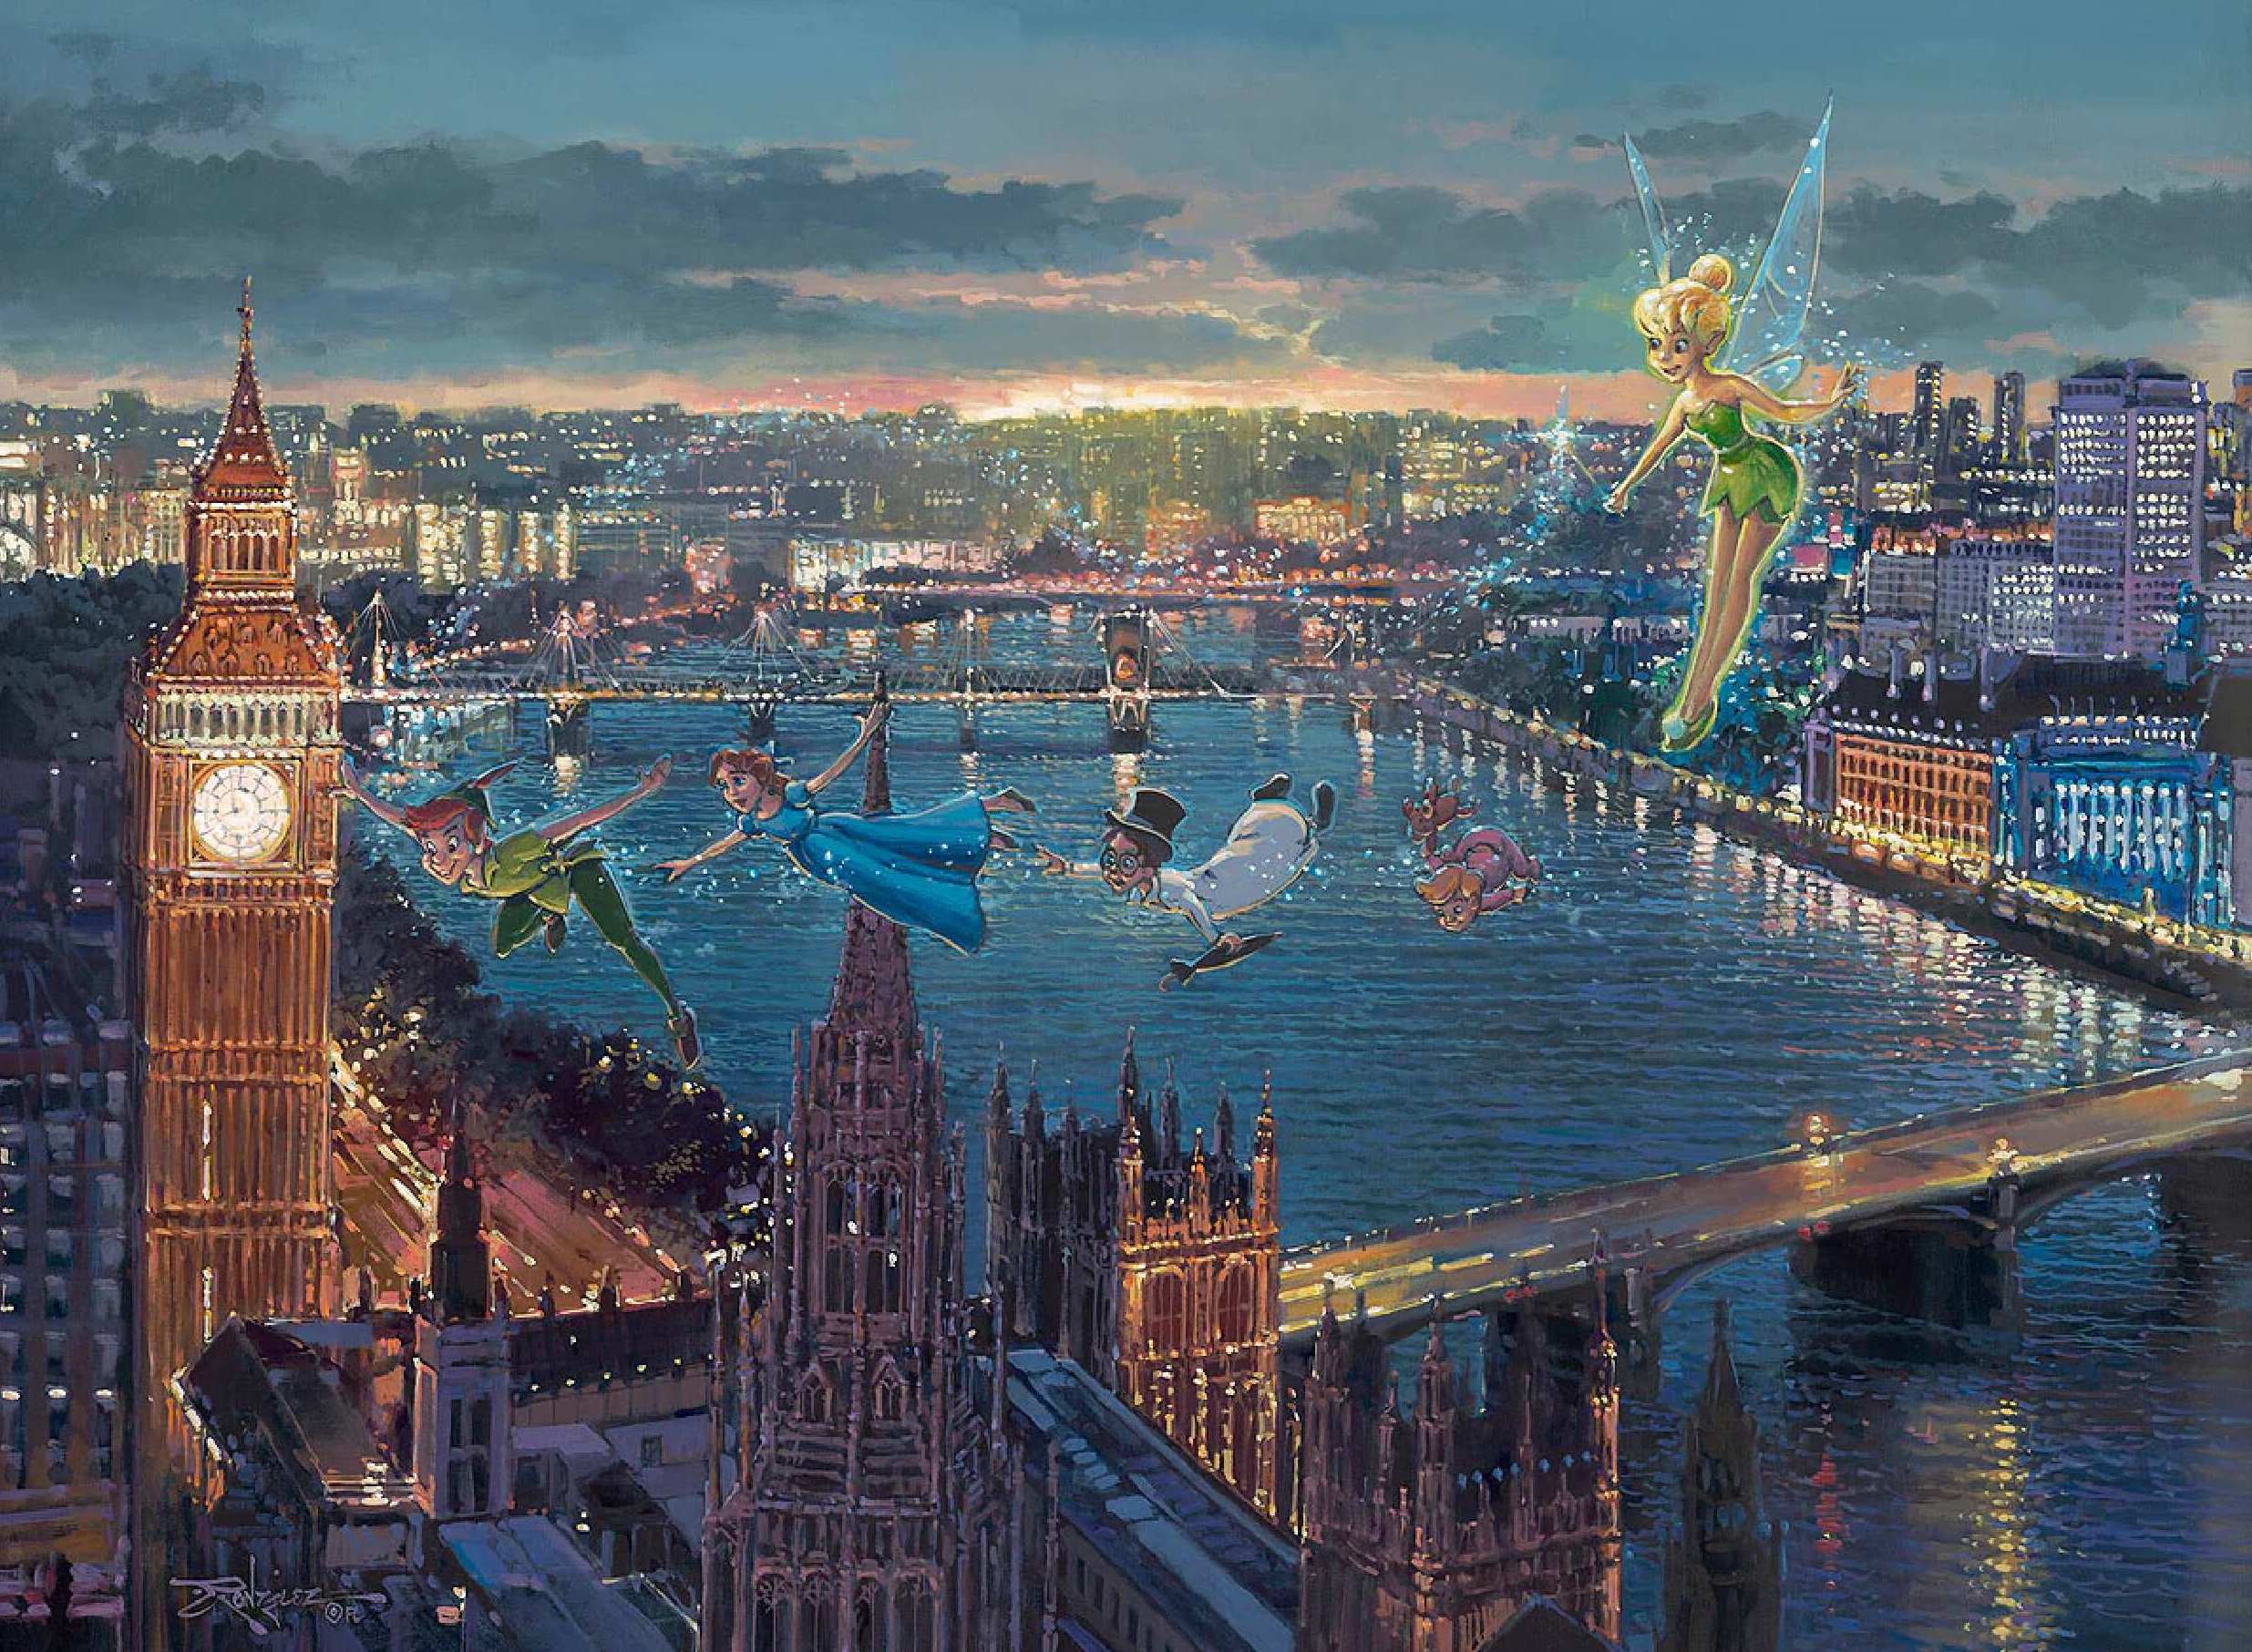 Peter Pan, Wendy, Tinker Bell, and the children as they soar over the rooftops of London 